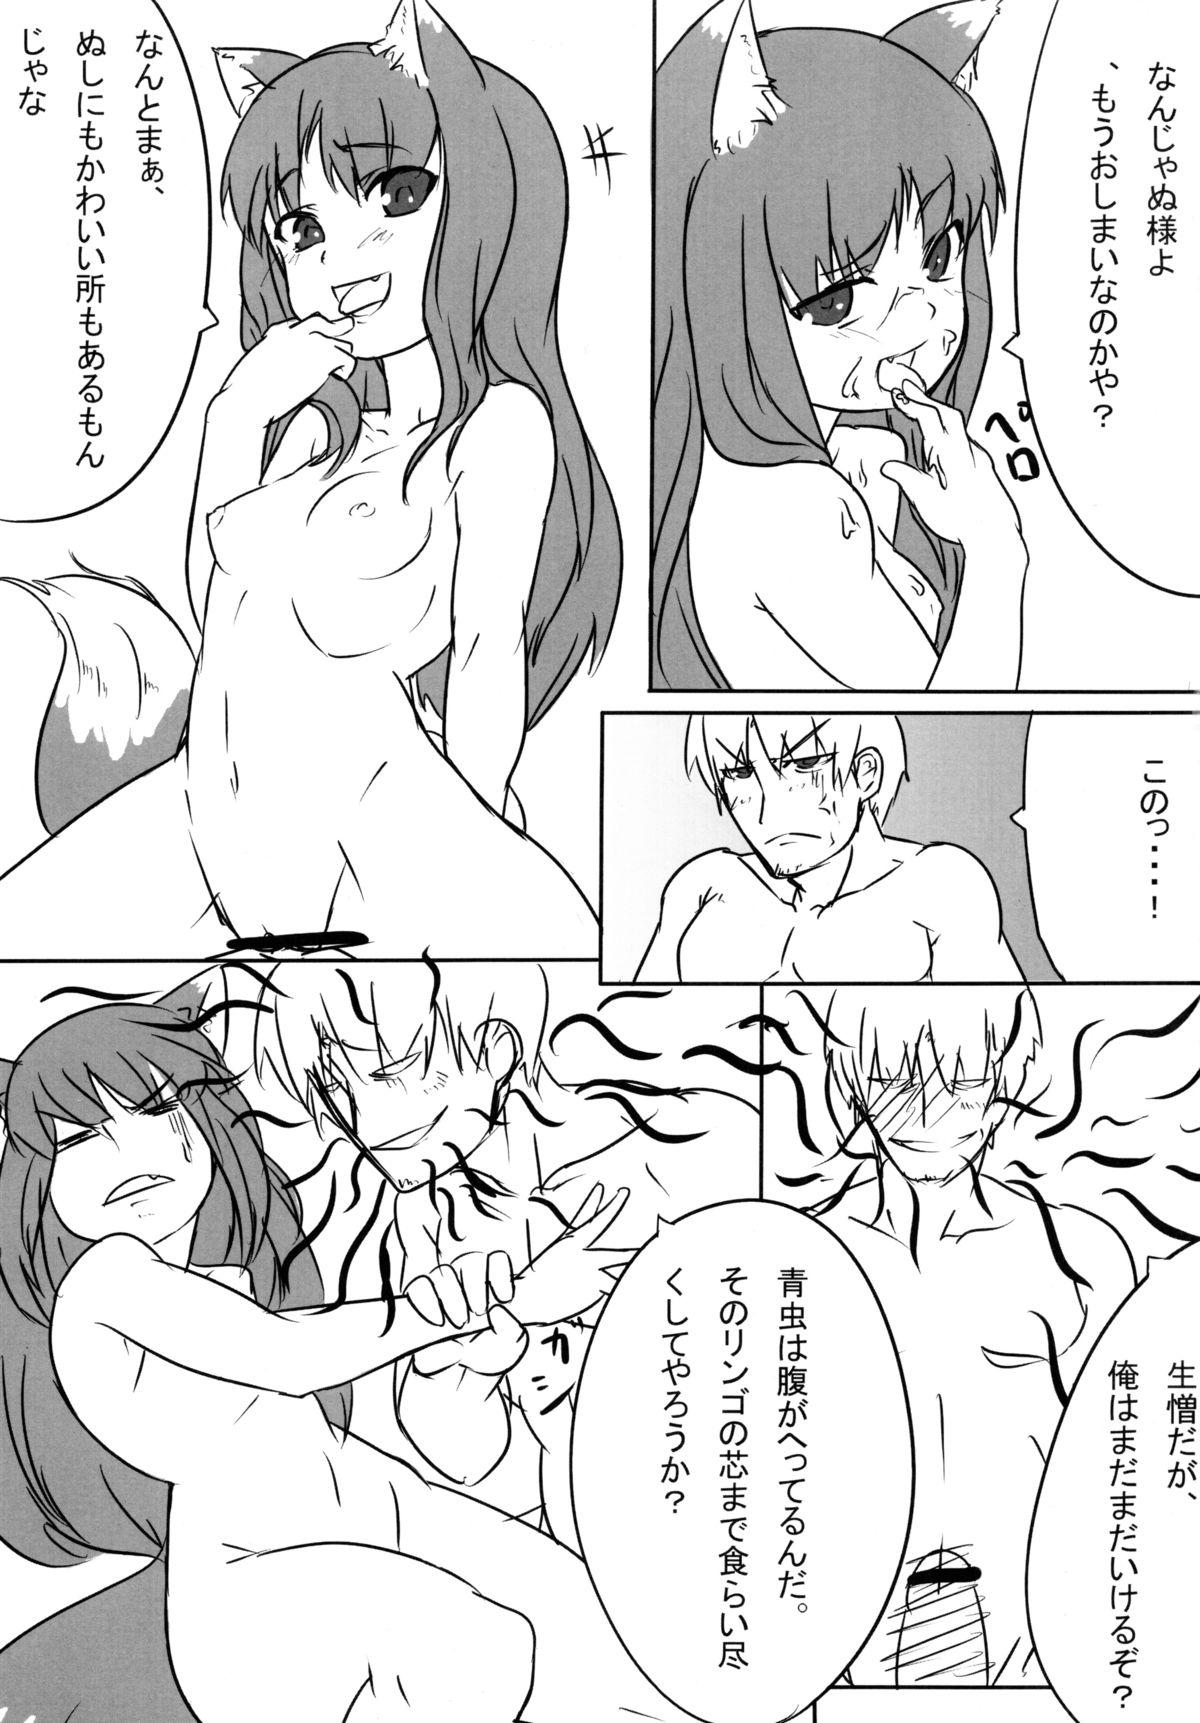 Ass Fetish Ookamito Koushinryou IIKB - Spice and wolf Work - Page 11